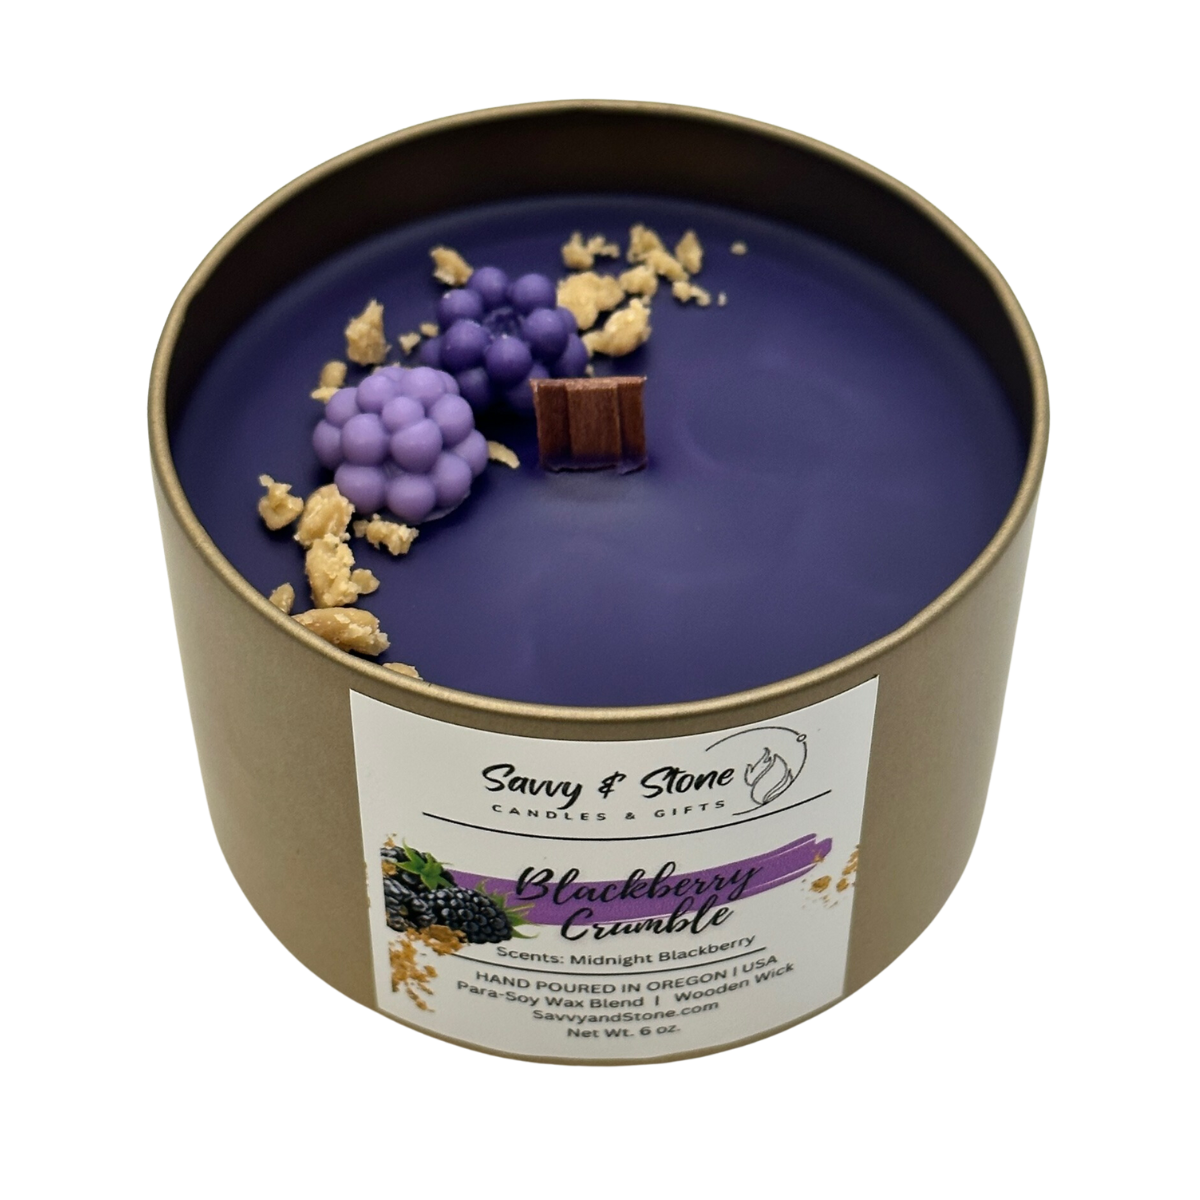 Blackberry Crumble | 6oz Soy Candle with Wooden Wick (Free Shipping over $35)